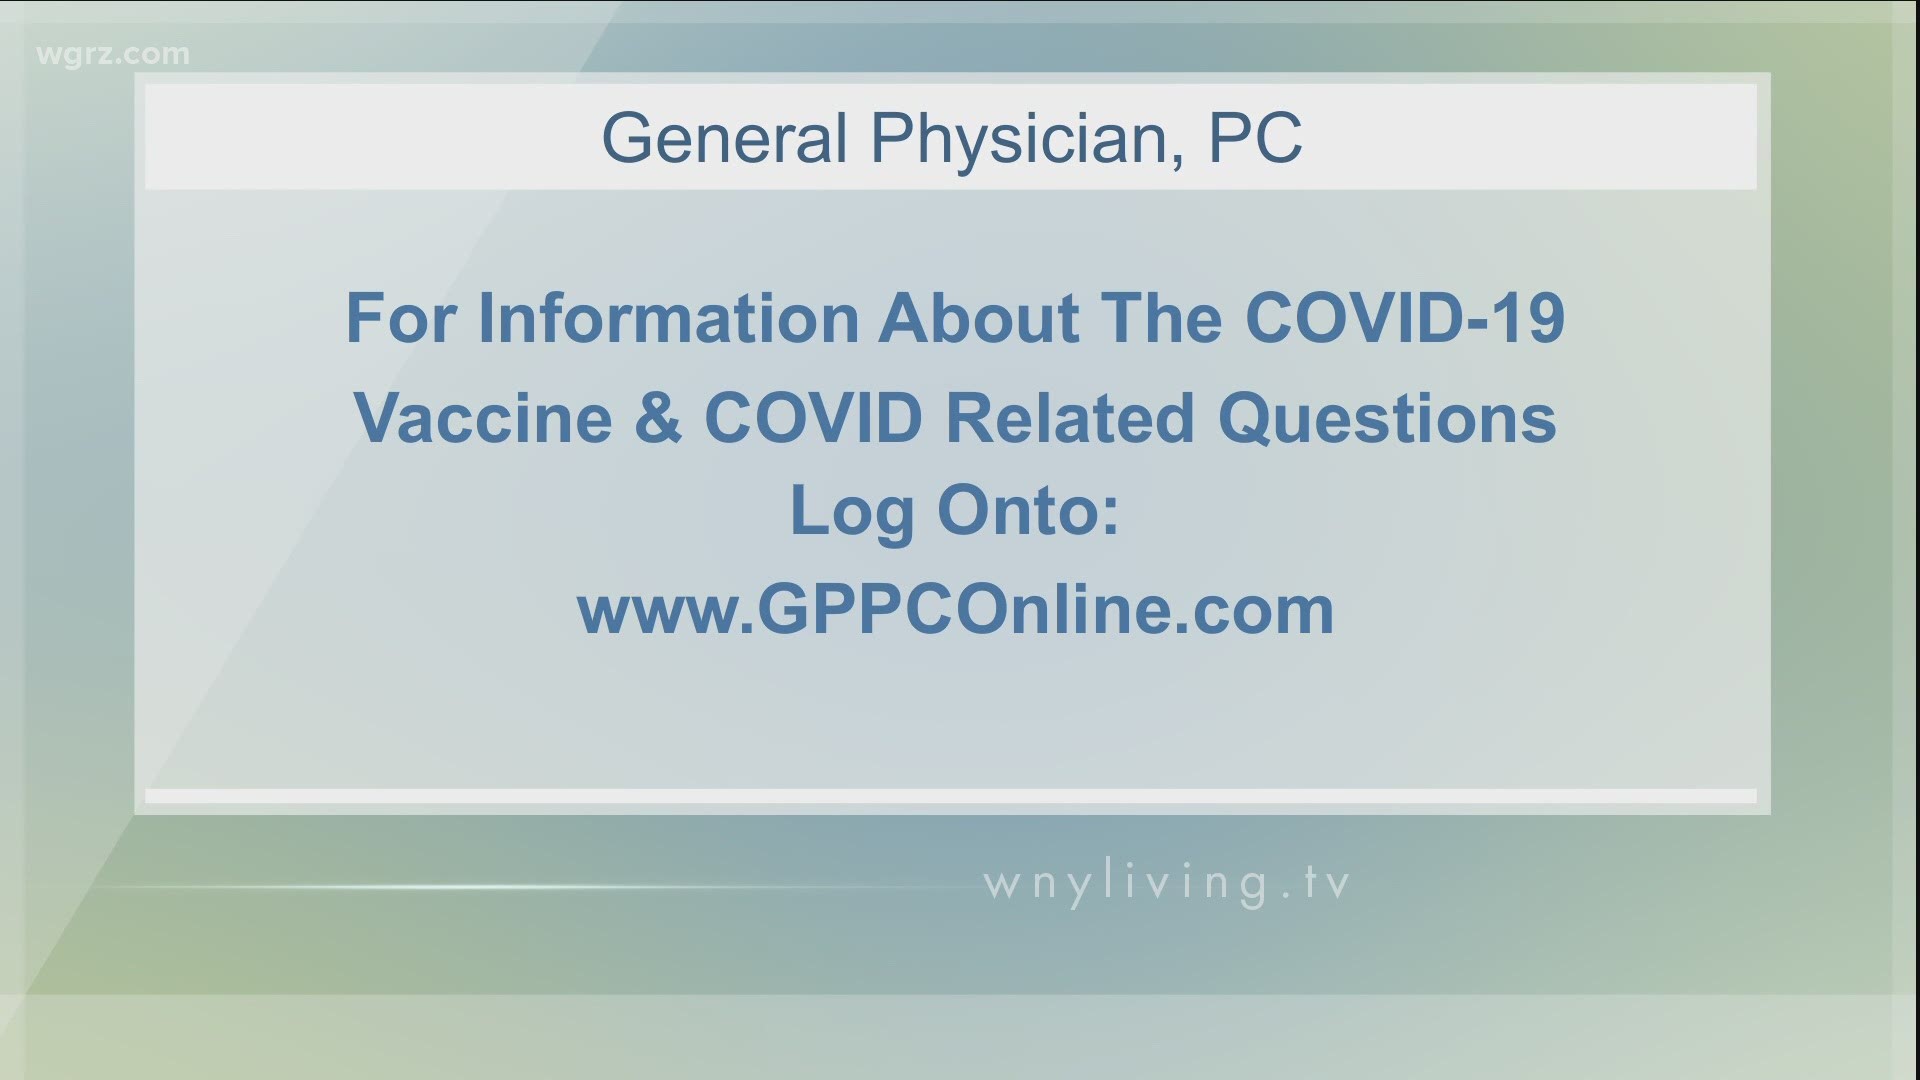 WNY Living - January 23 - General Physician, PC (THIS VIDEO IS SPONSORED BY GENERAL PHYSICIAN, PC)